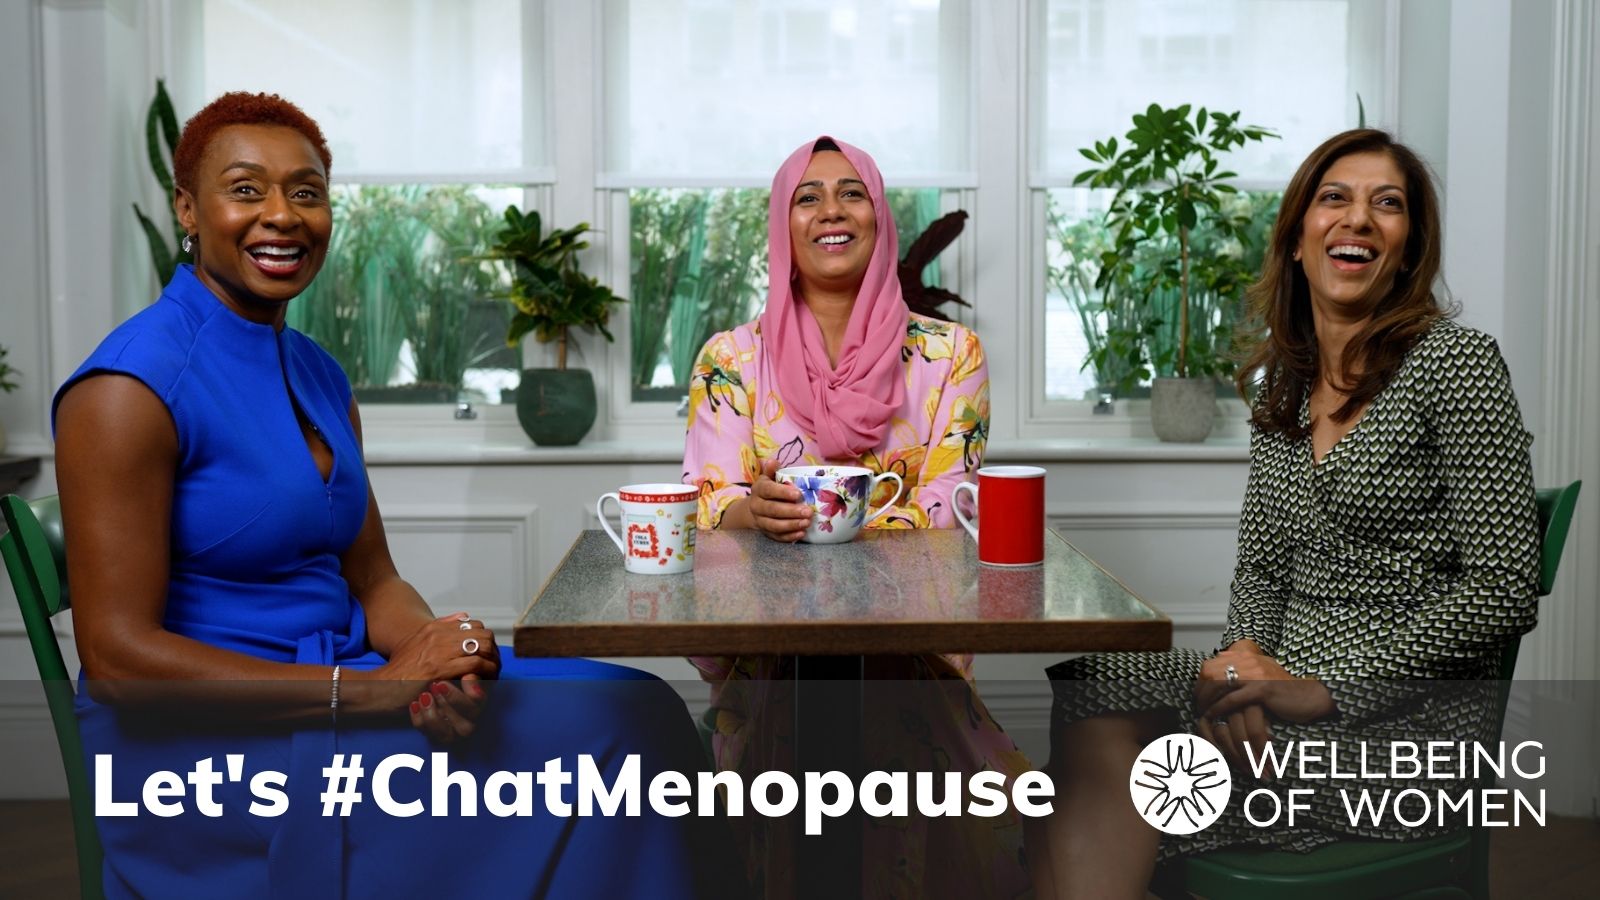 Let's #ChatMenopause campaign, wellbeing of women